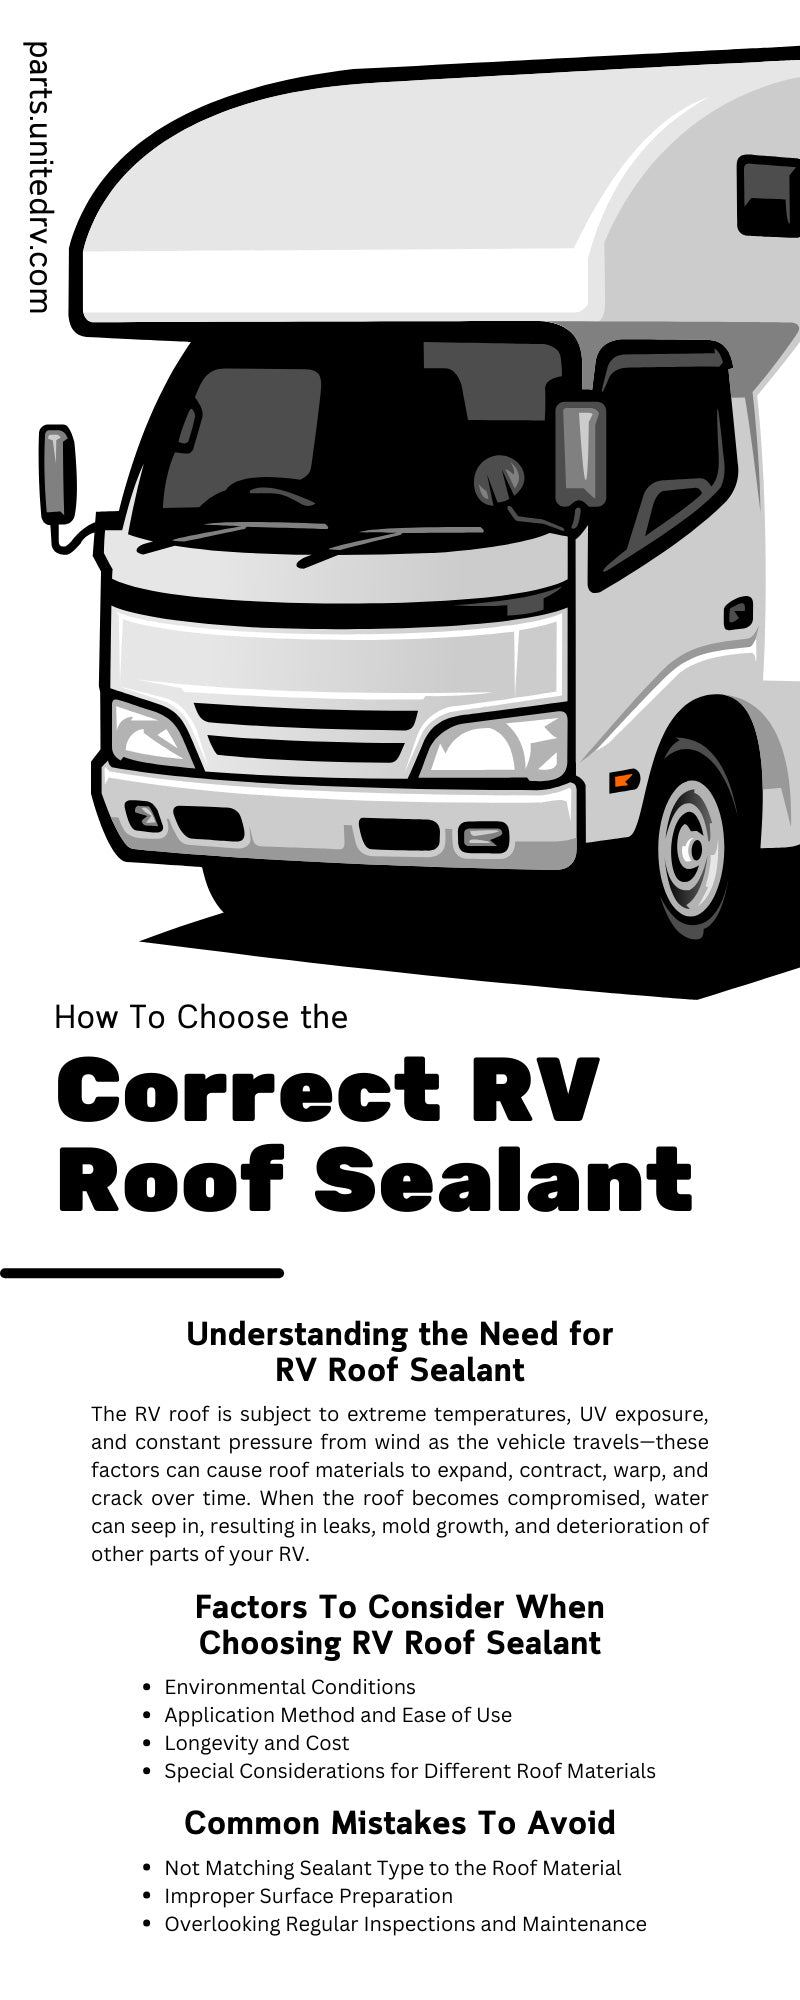 How To Choose the Correct RV Roof Sealant